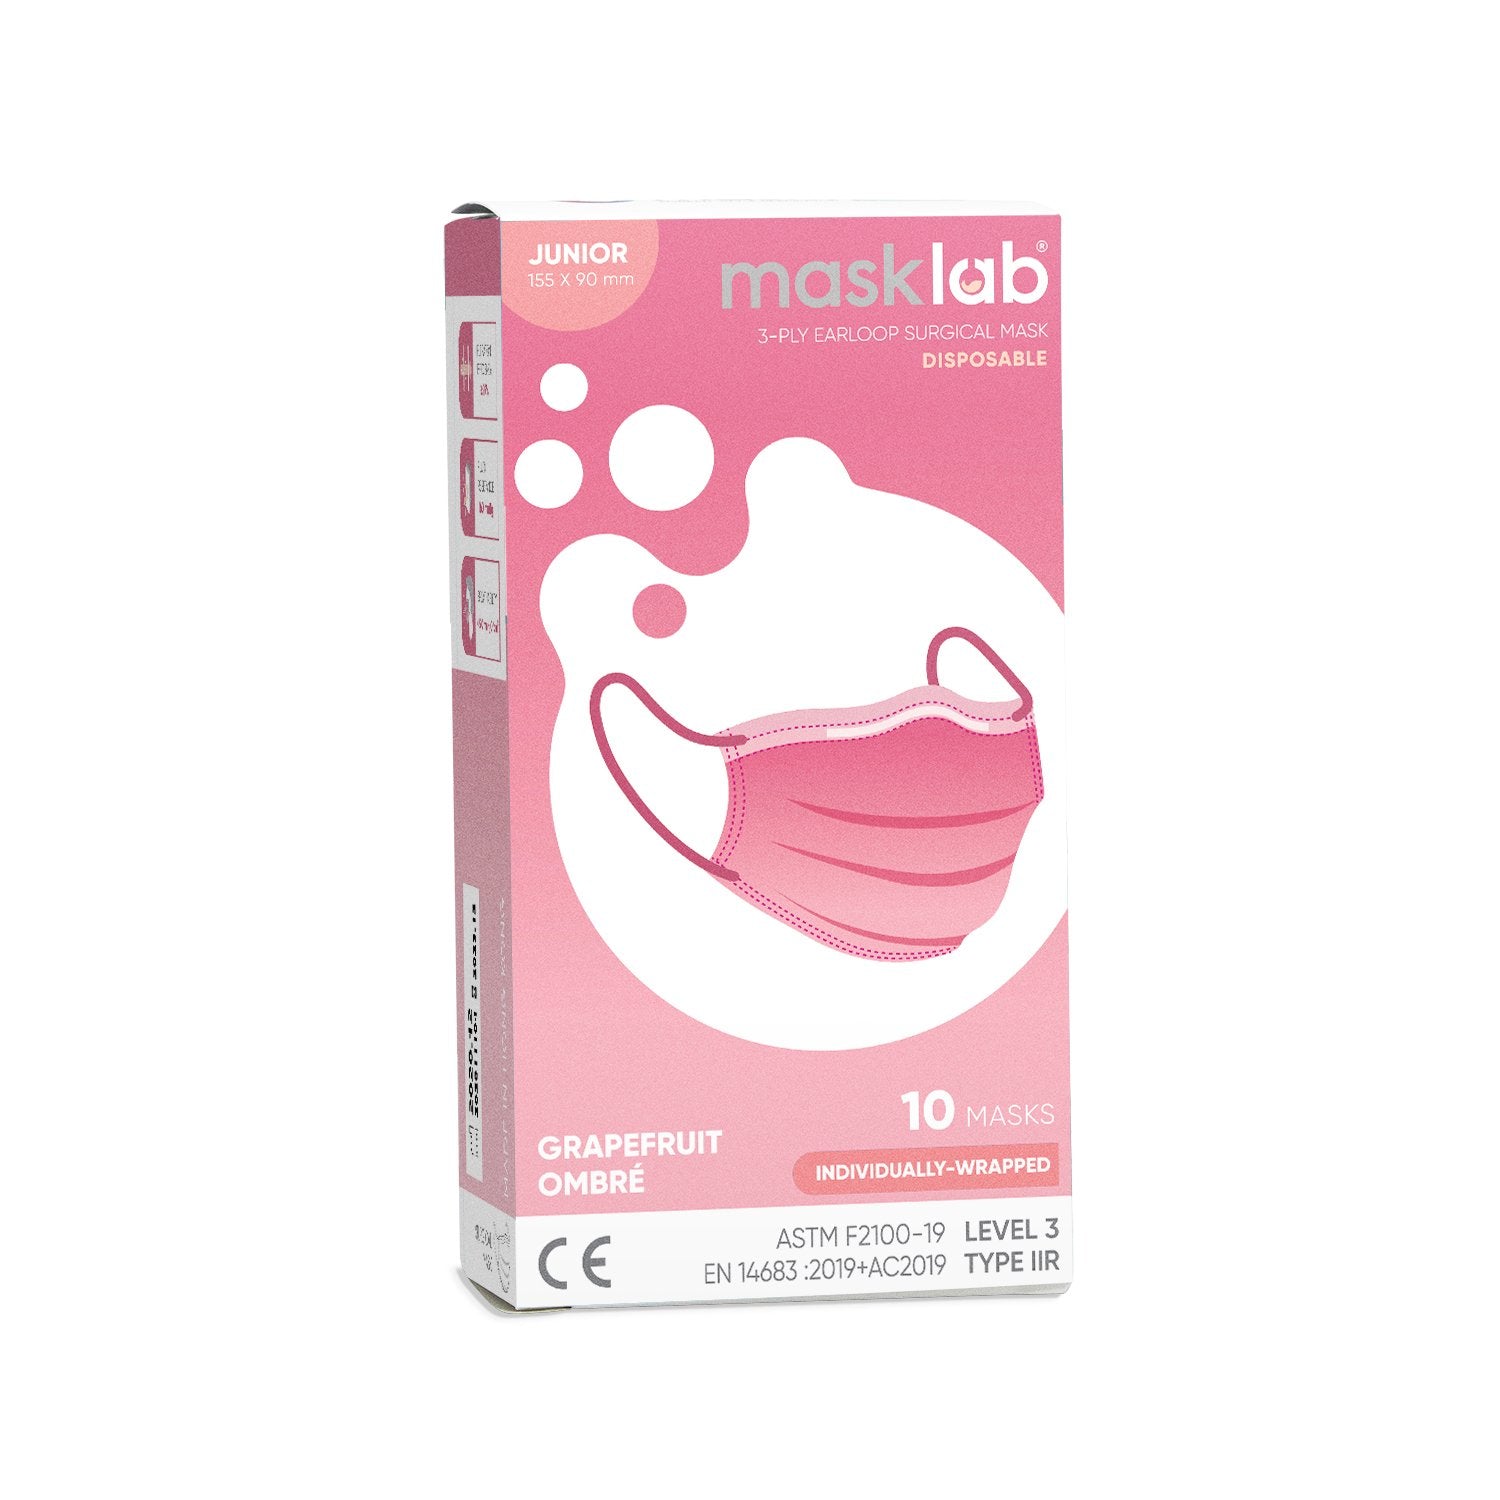 masklab™ Grapefruit Ombré Junior Size 3-ply Surgical Mask 2.0+ (Box of 10, Individually-wrapped)